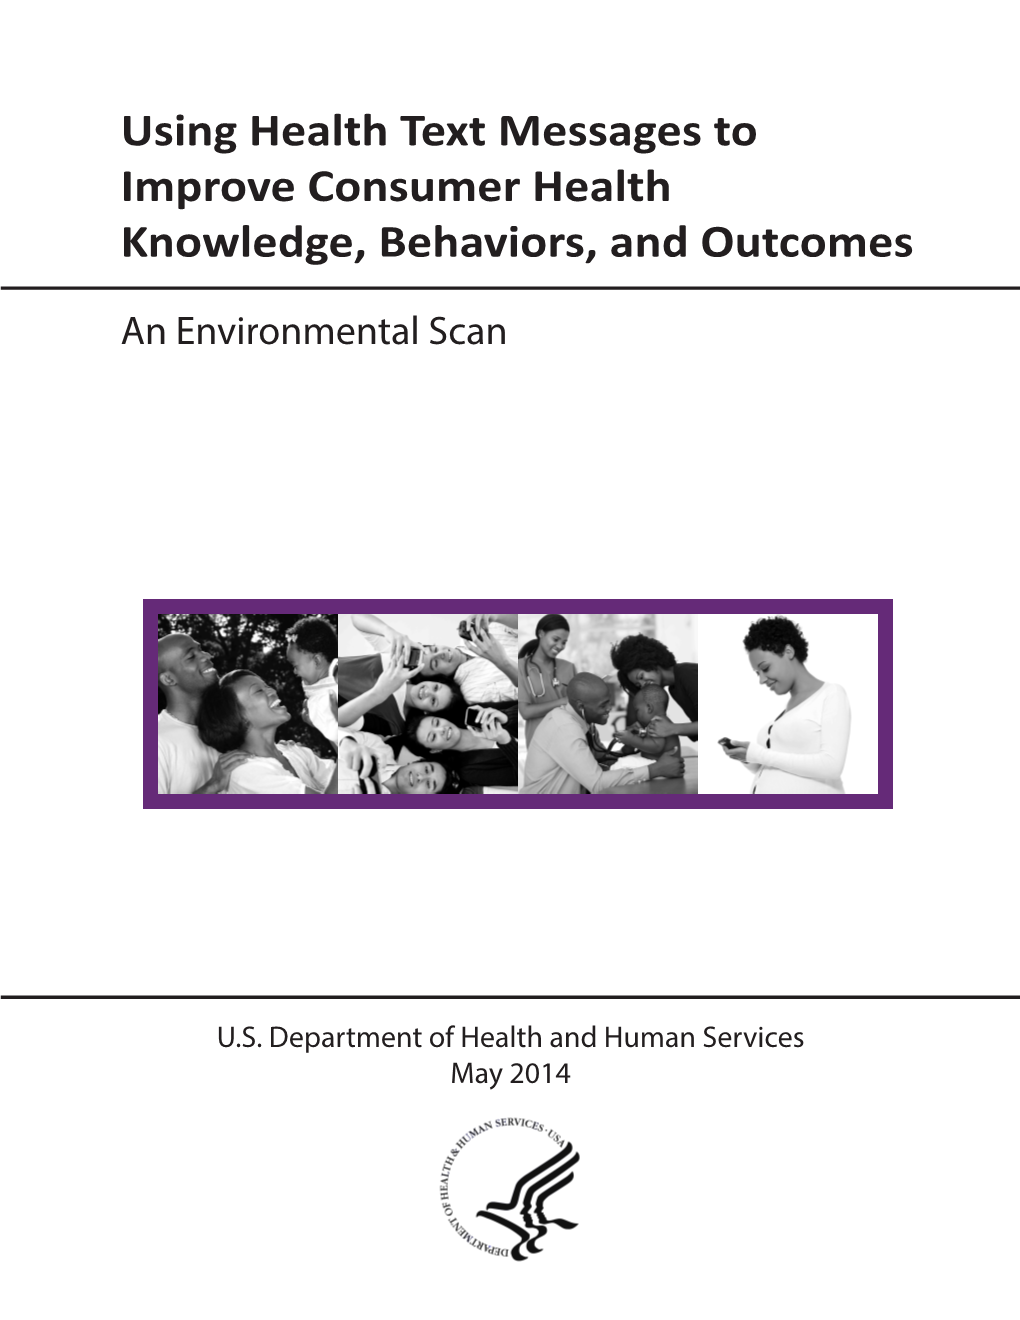 Using Health Text Messages to Improve Consumer Health Knowledge, Behaviors, and Outcomes